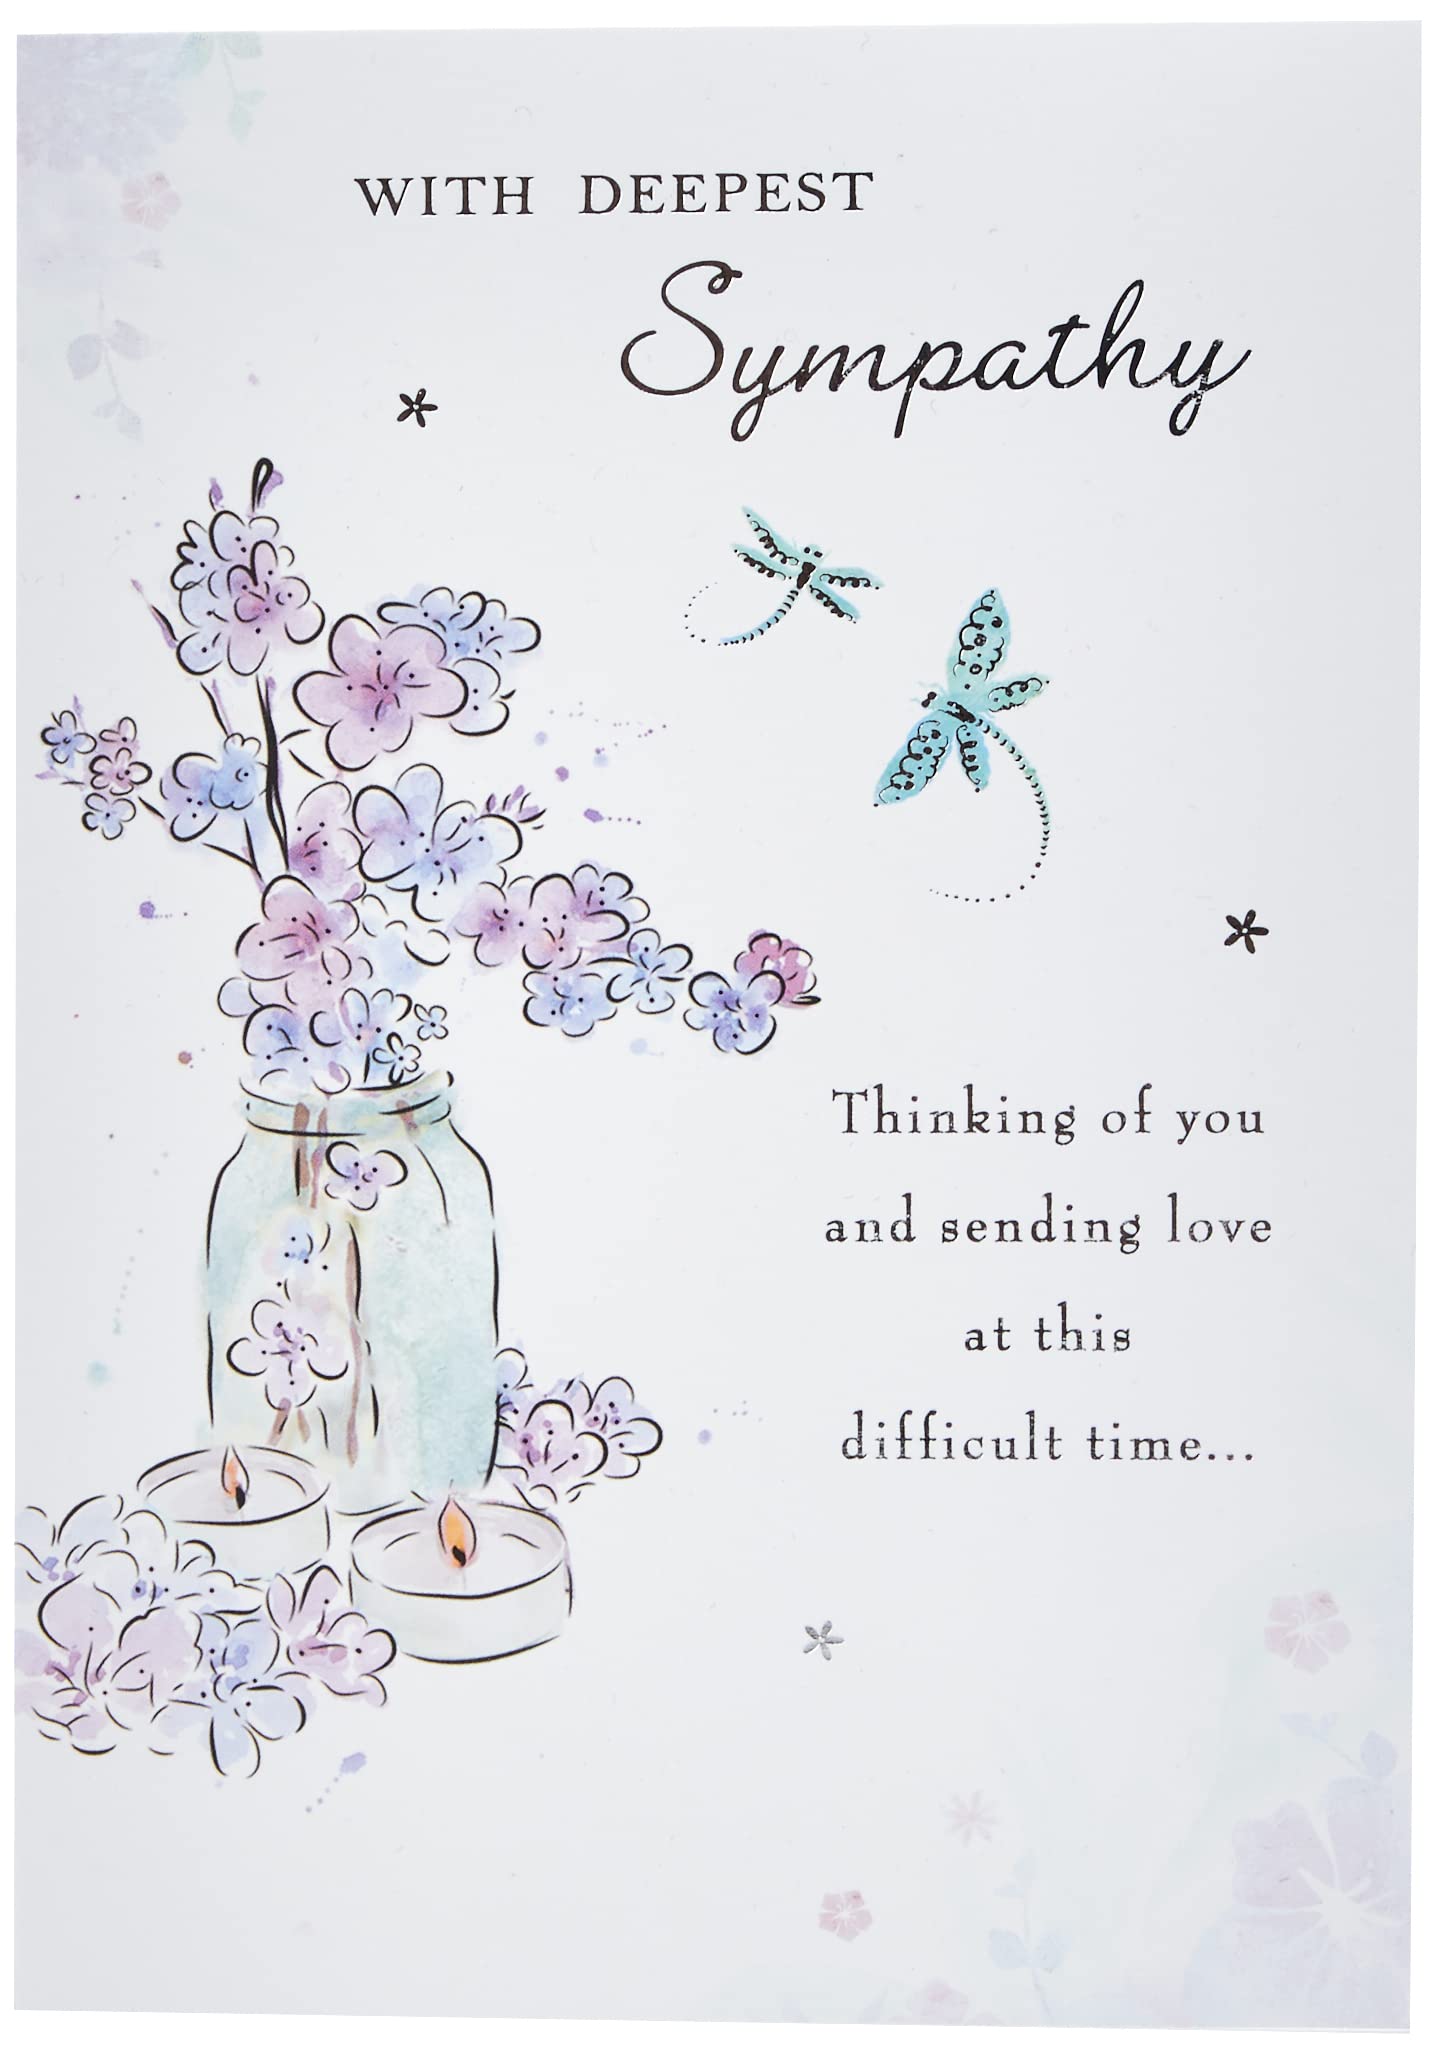 Tendance  Piccadilly Greetings Group Ltd Carte de vœux « WONDERFULLY WORDED WITH DEEPEST SYMPATHY » - 17,8 x 12,7 cm, blanc, gris, noir m3qOORCpe mode